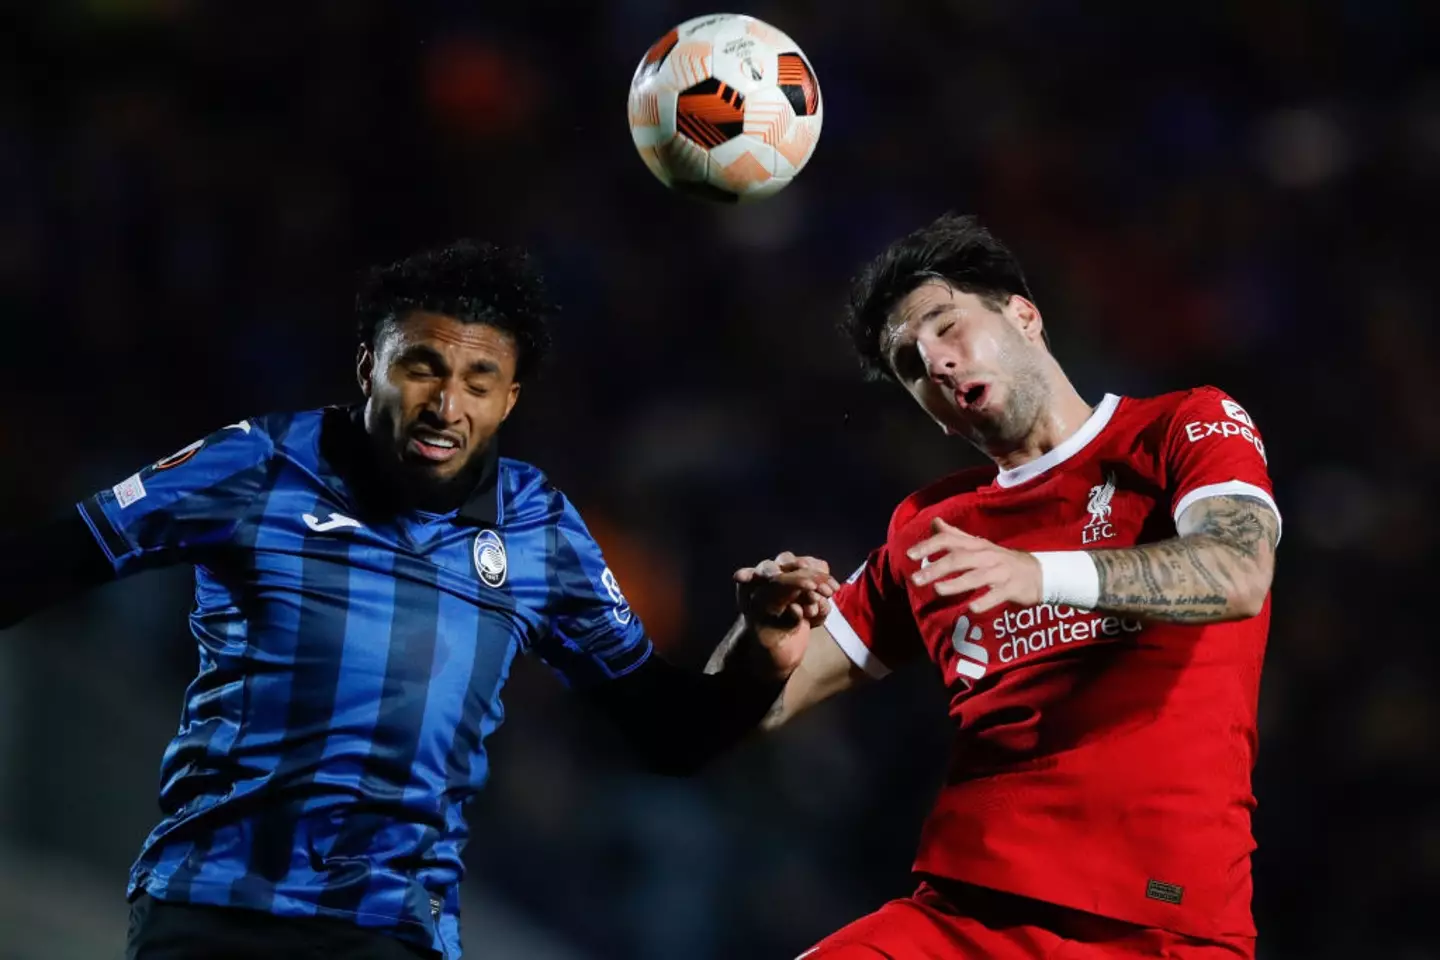 Liverpool were beaten by Atalanta in the Europa League (Image: Getty)